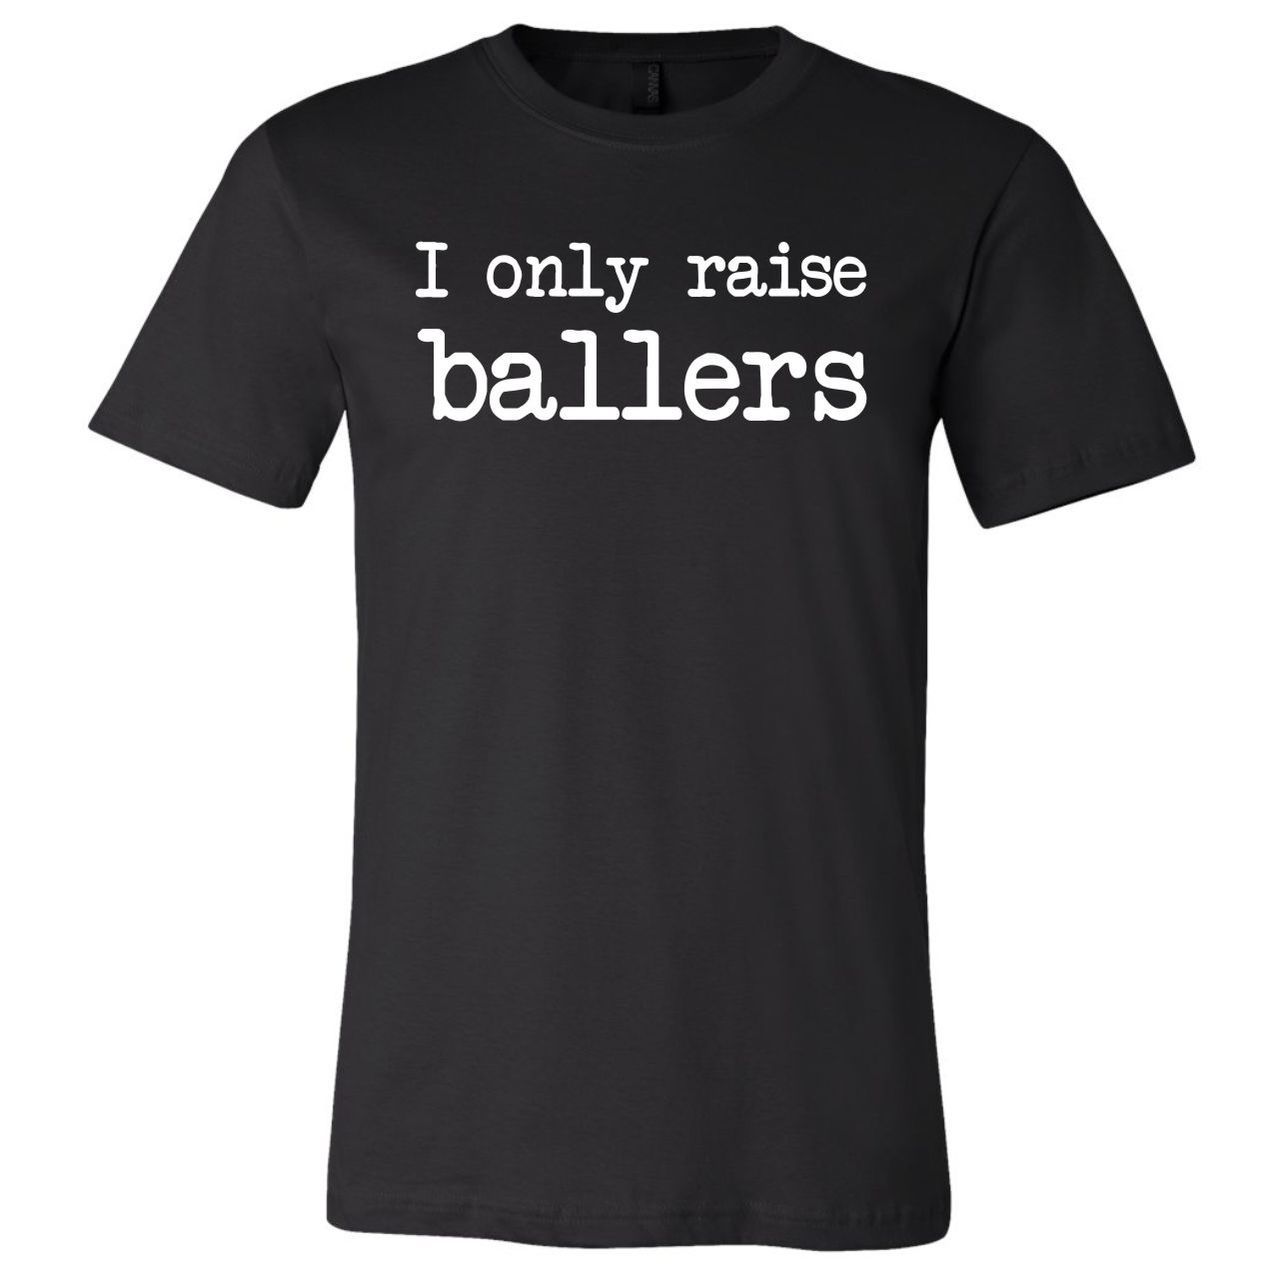 I Only Raise Ballers - Unisex Tee - The Graphic Tee